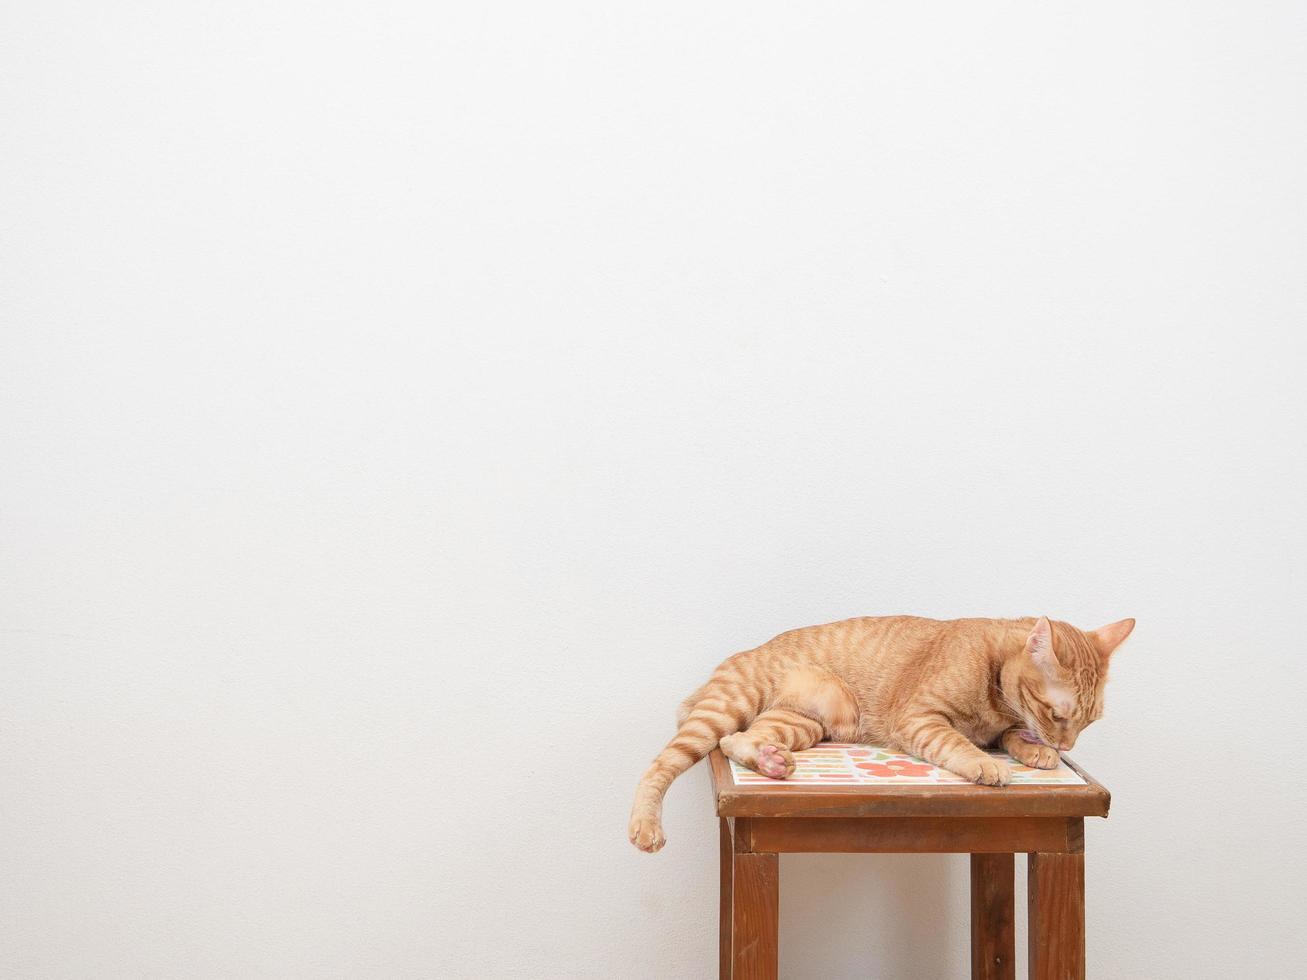 Cute cat orange color sitting on chair looking at camera on white background photo